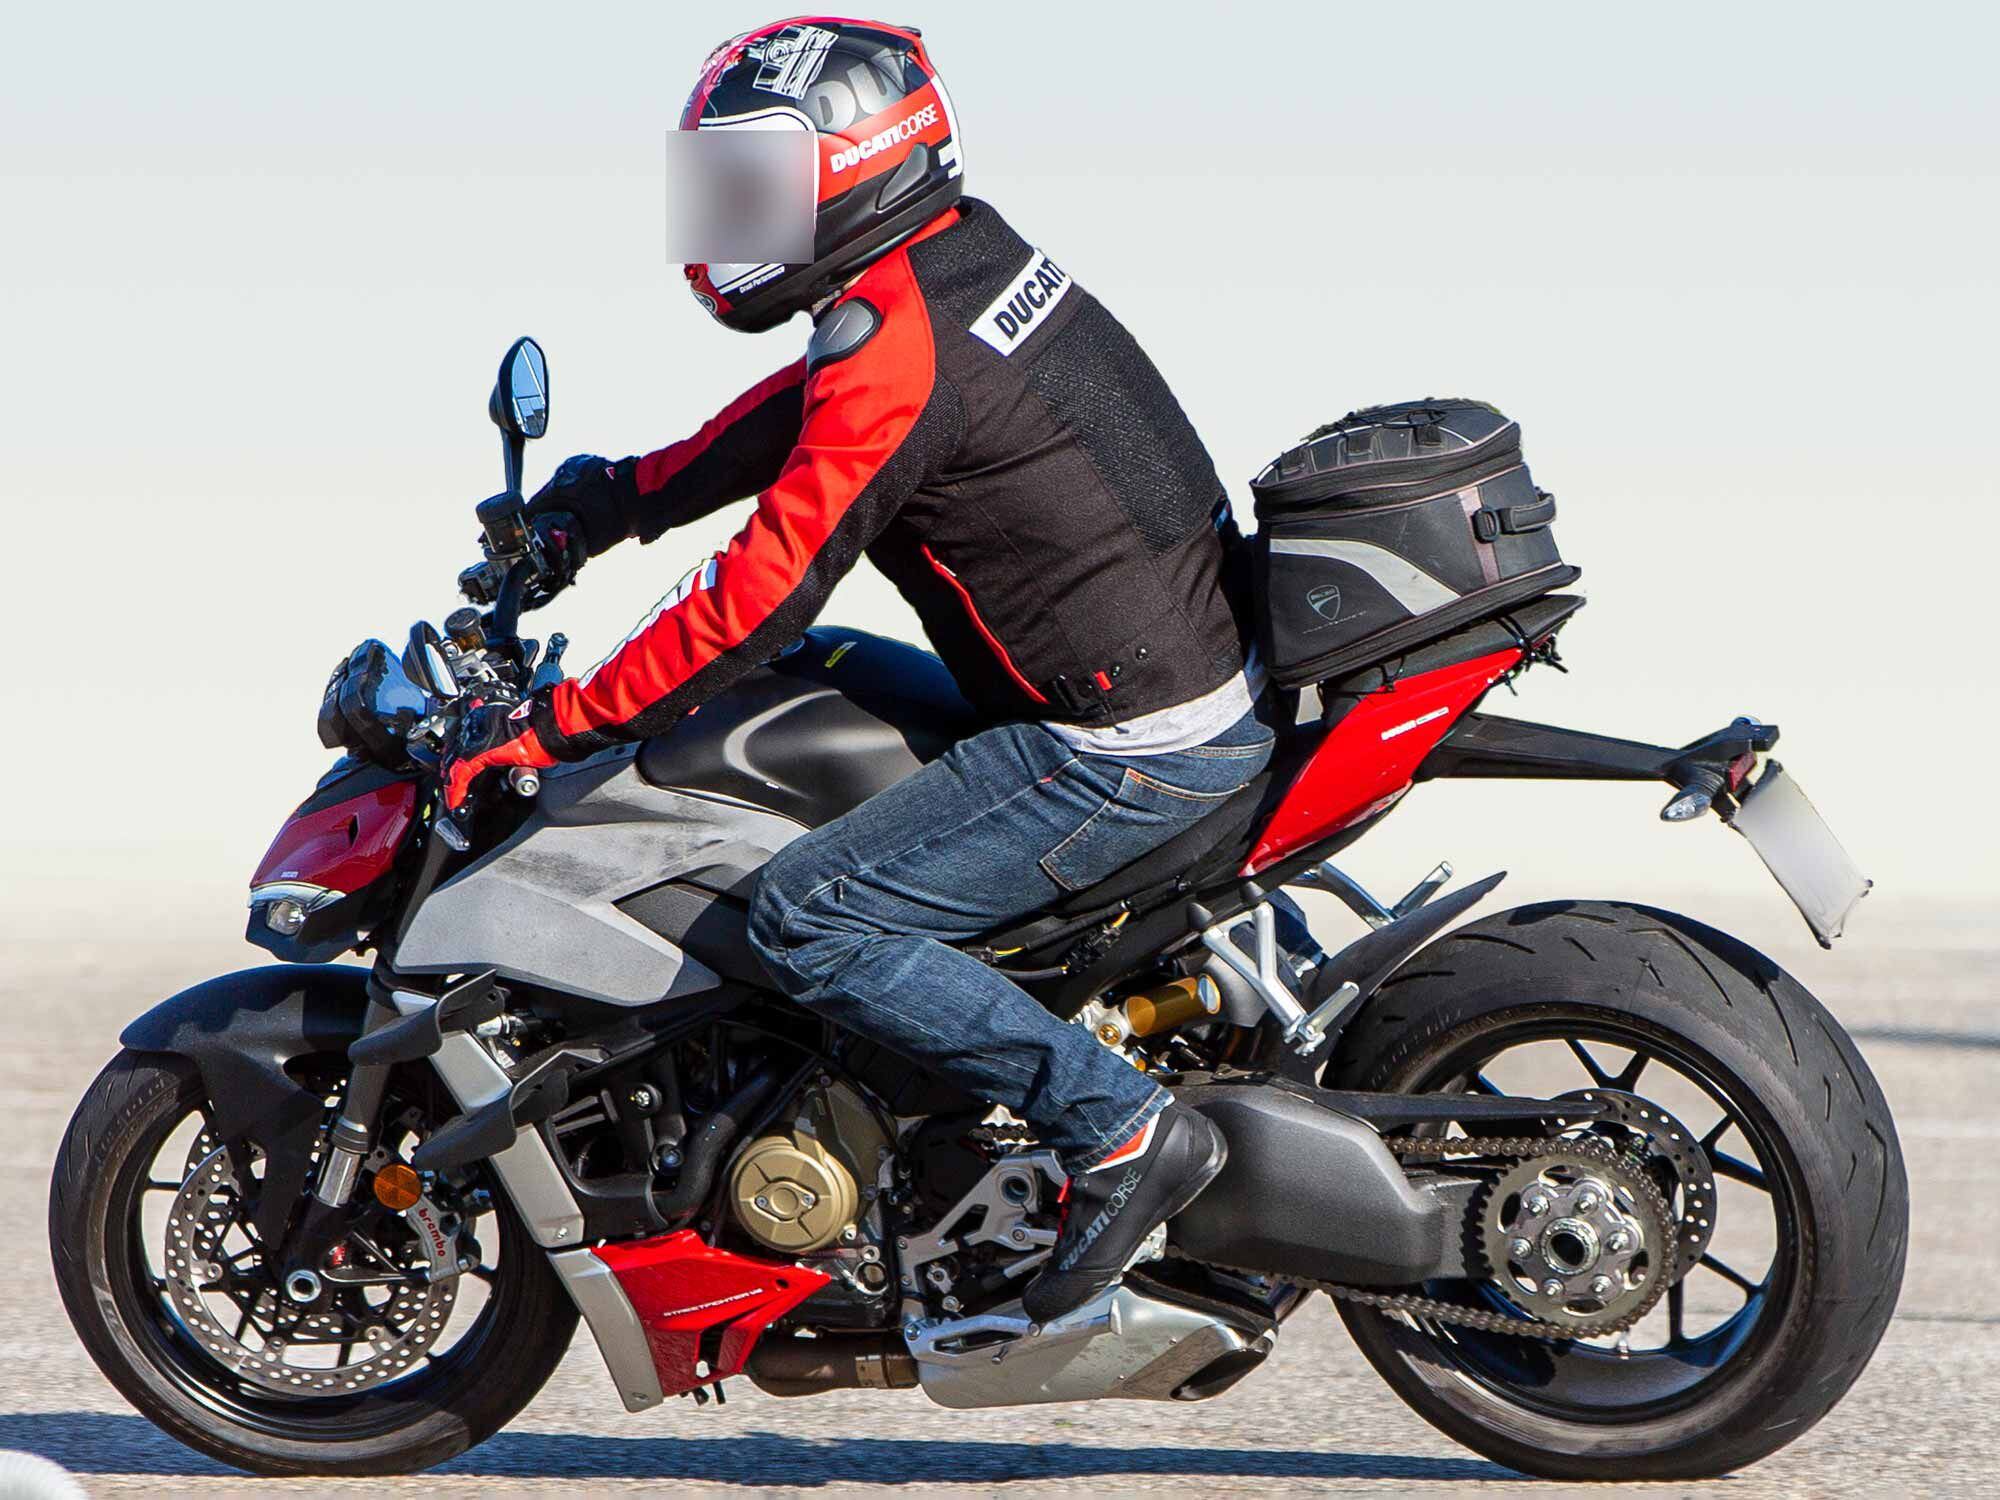 We believe these recent spy images are of the 2023 Ducati Streetfighter V4 that will be announced in the next month or so.